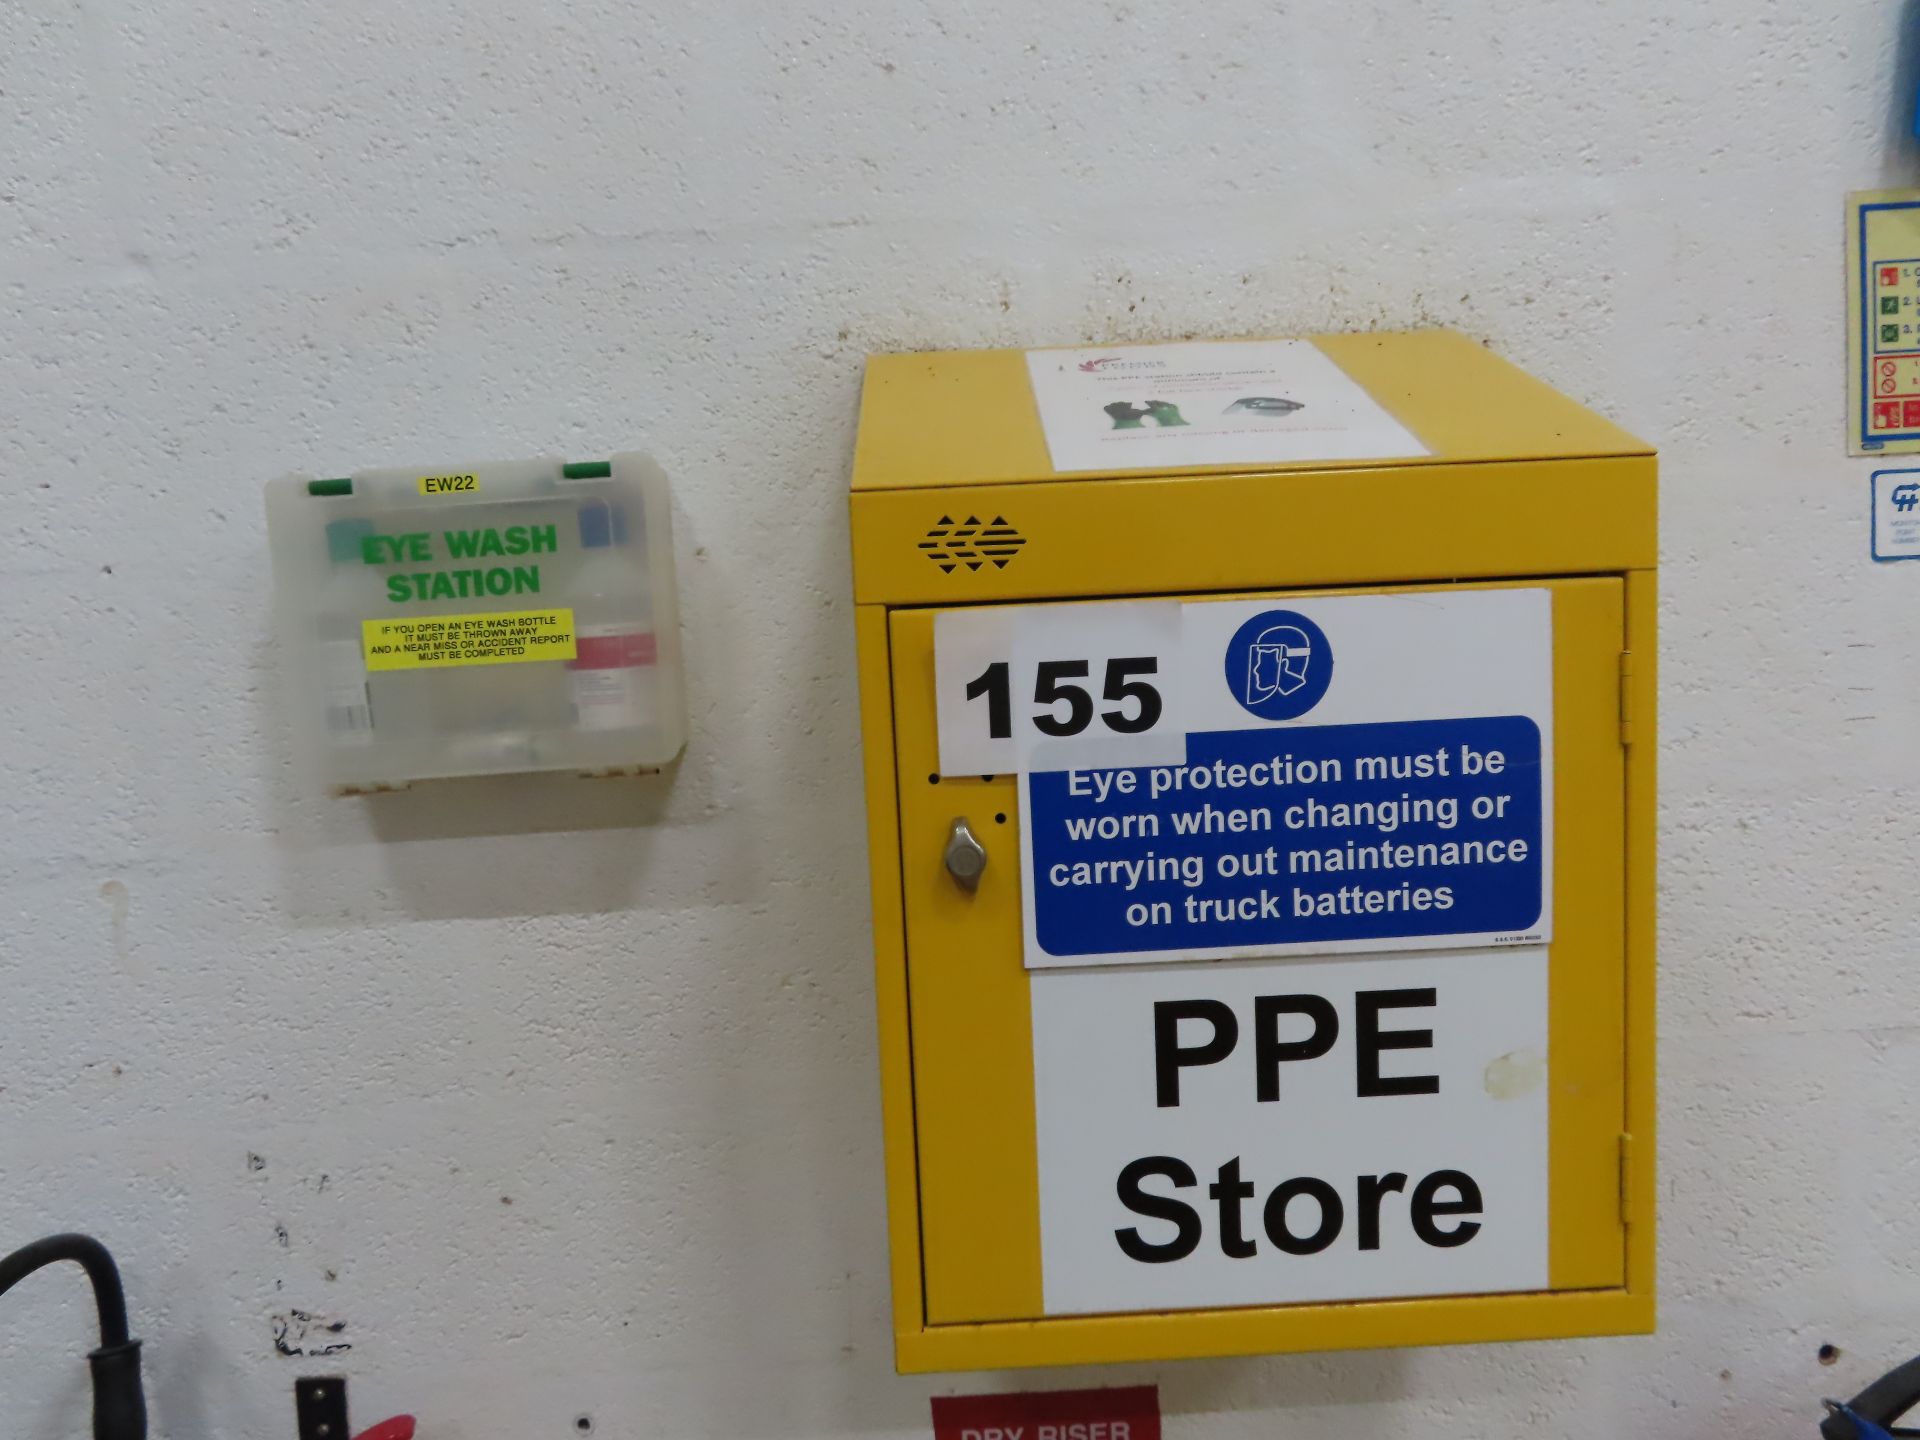 WALL MOUNTED PPE STORAGE UNIT AND EYE WASH STATION.